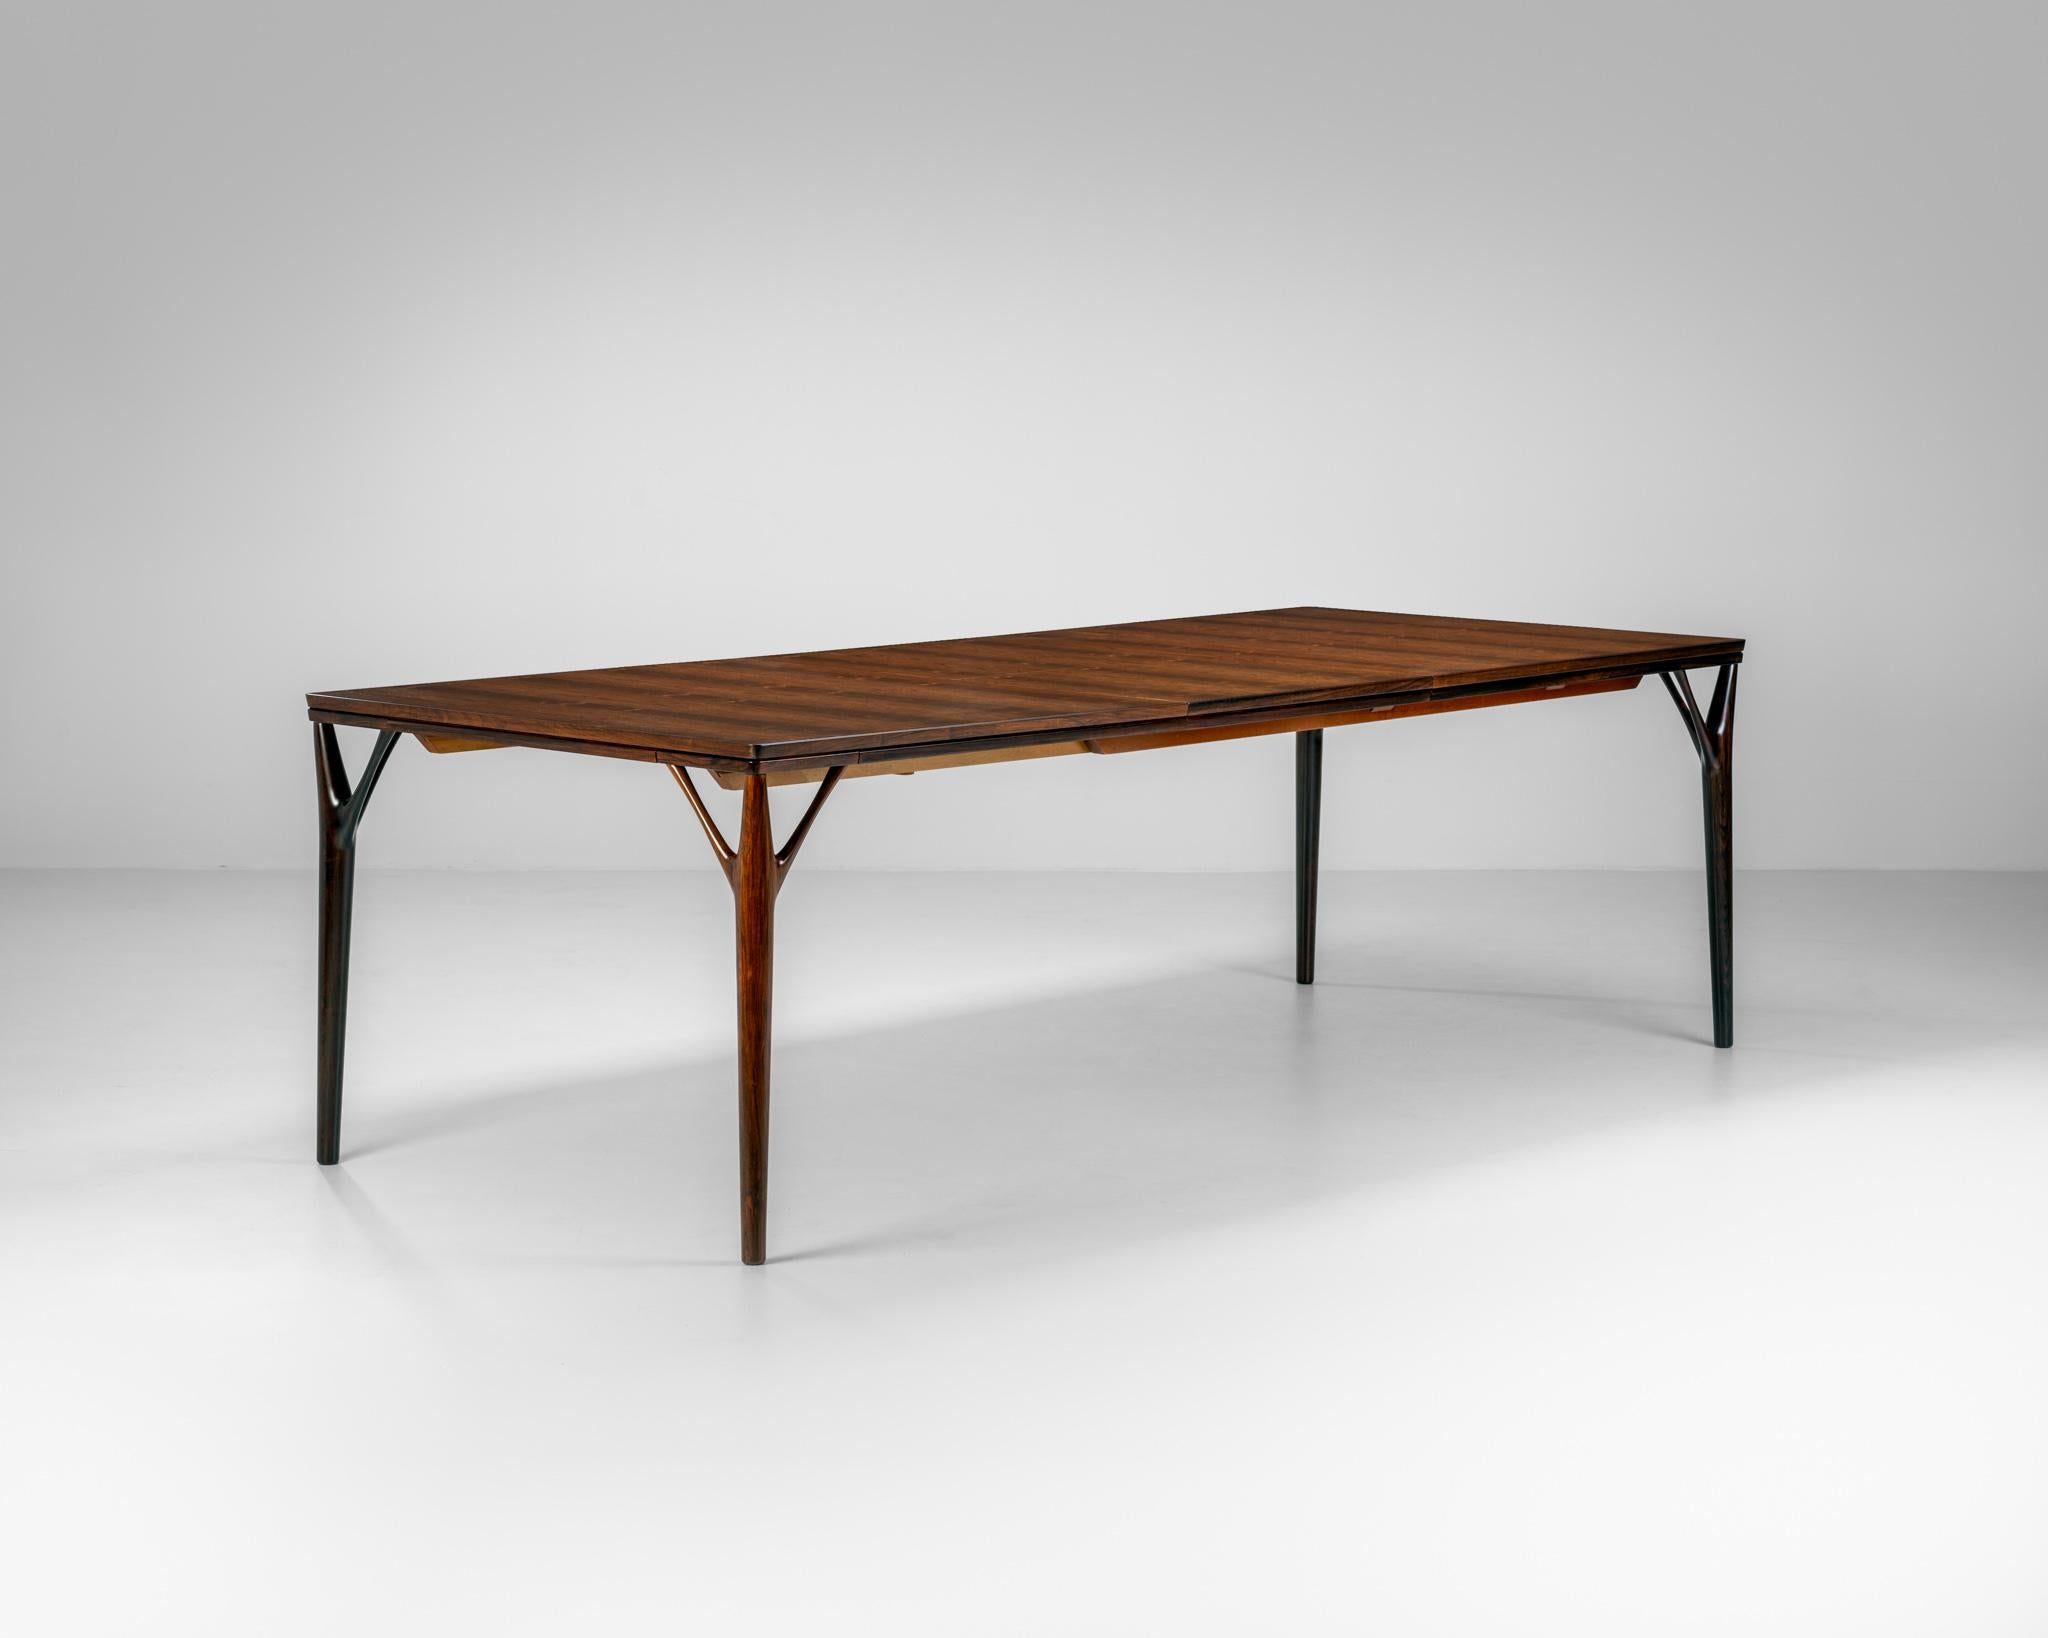 Willy Sigh’s model 180 ‘Tree Leg’ dining table for his company, H. Sigh & Søn. It dates prior to 1968 when it was presented in the Børge Søndergaard catalog, but probably not much before. This table is almost universally misattributed to Helge